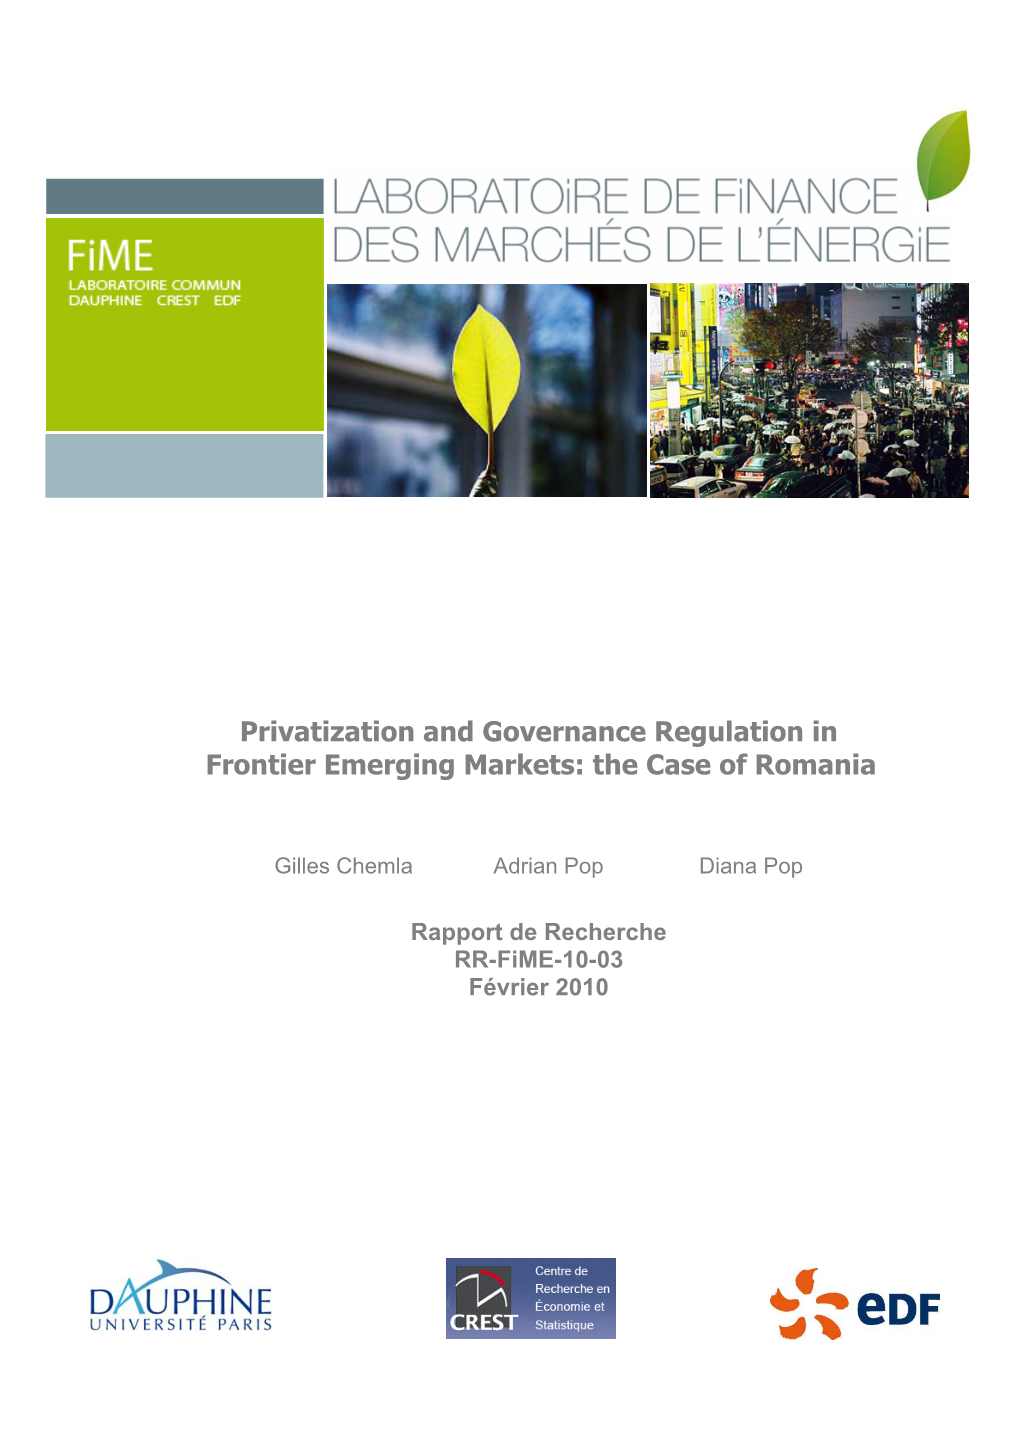 Privatization and Governance Regulation in Frontier Emerging Markets: the Case of Romania